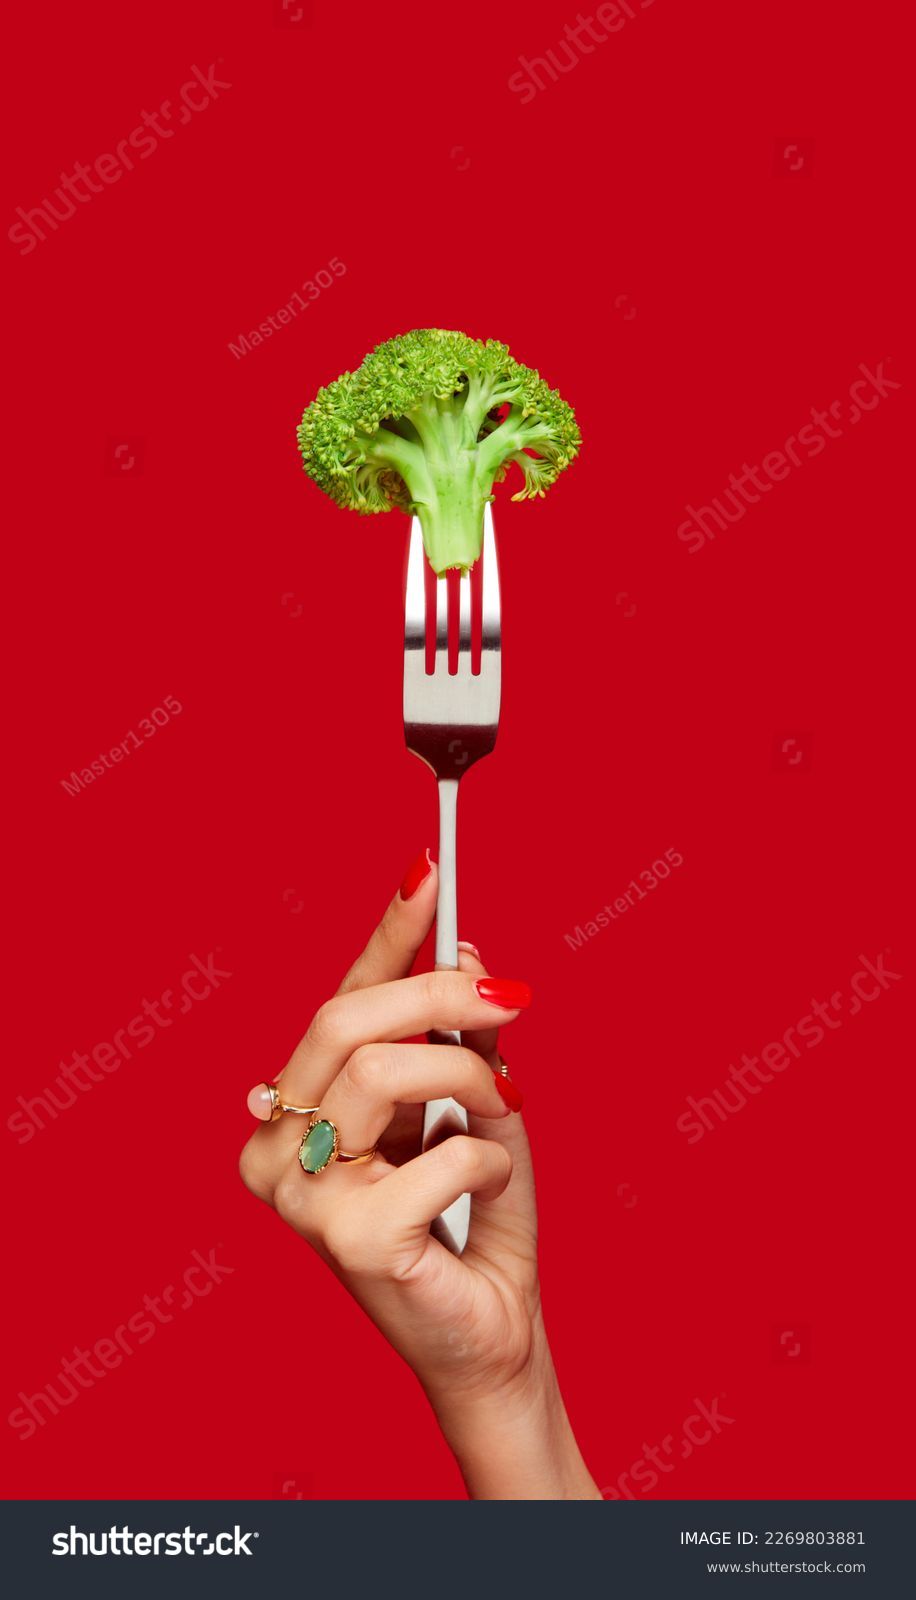 Female hand holding broccoli on fork against red studio background. Healthy eating. Food pop art photography. Concept of art and creativity. Complementary colors. Copy space for ad, text #2269803881